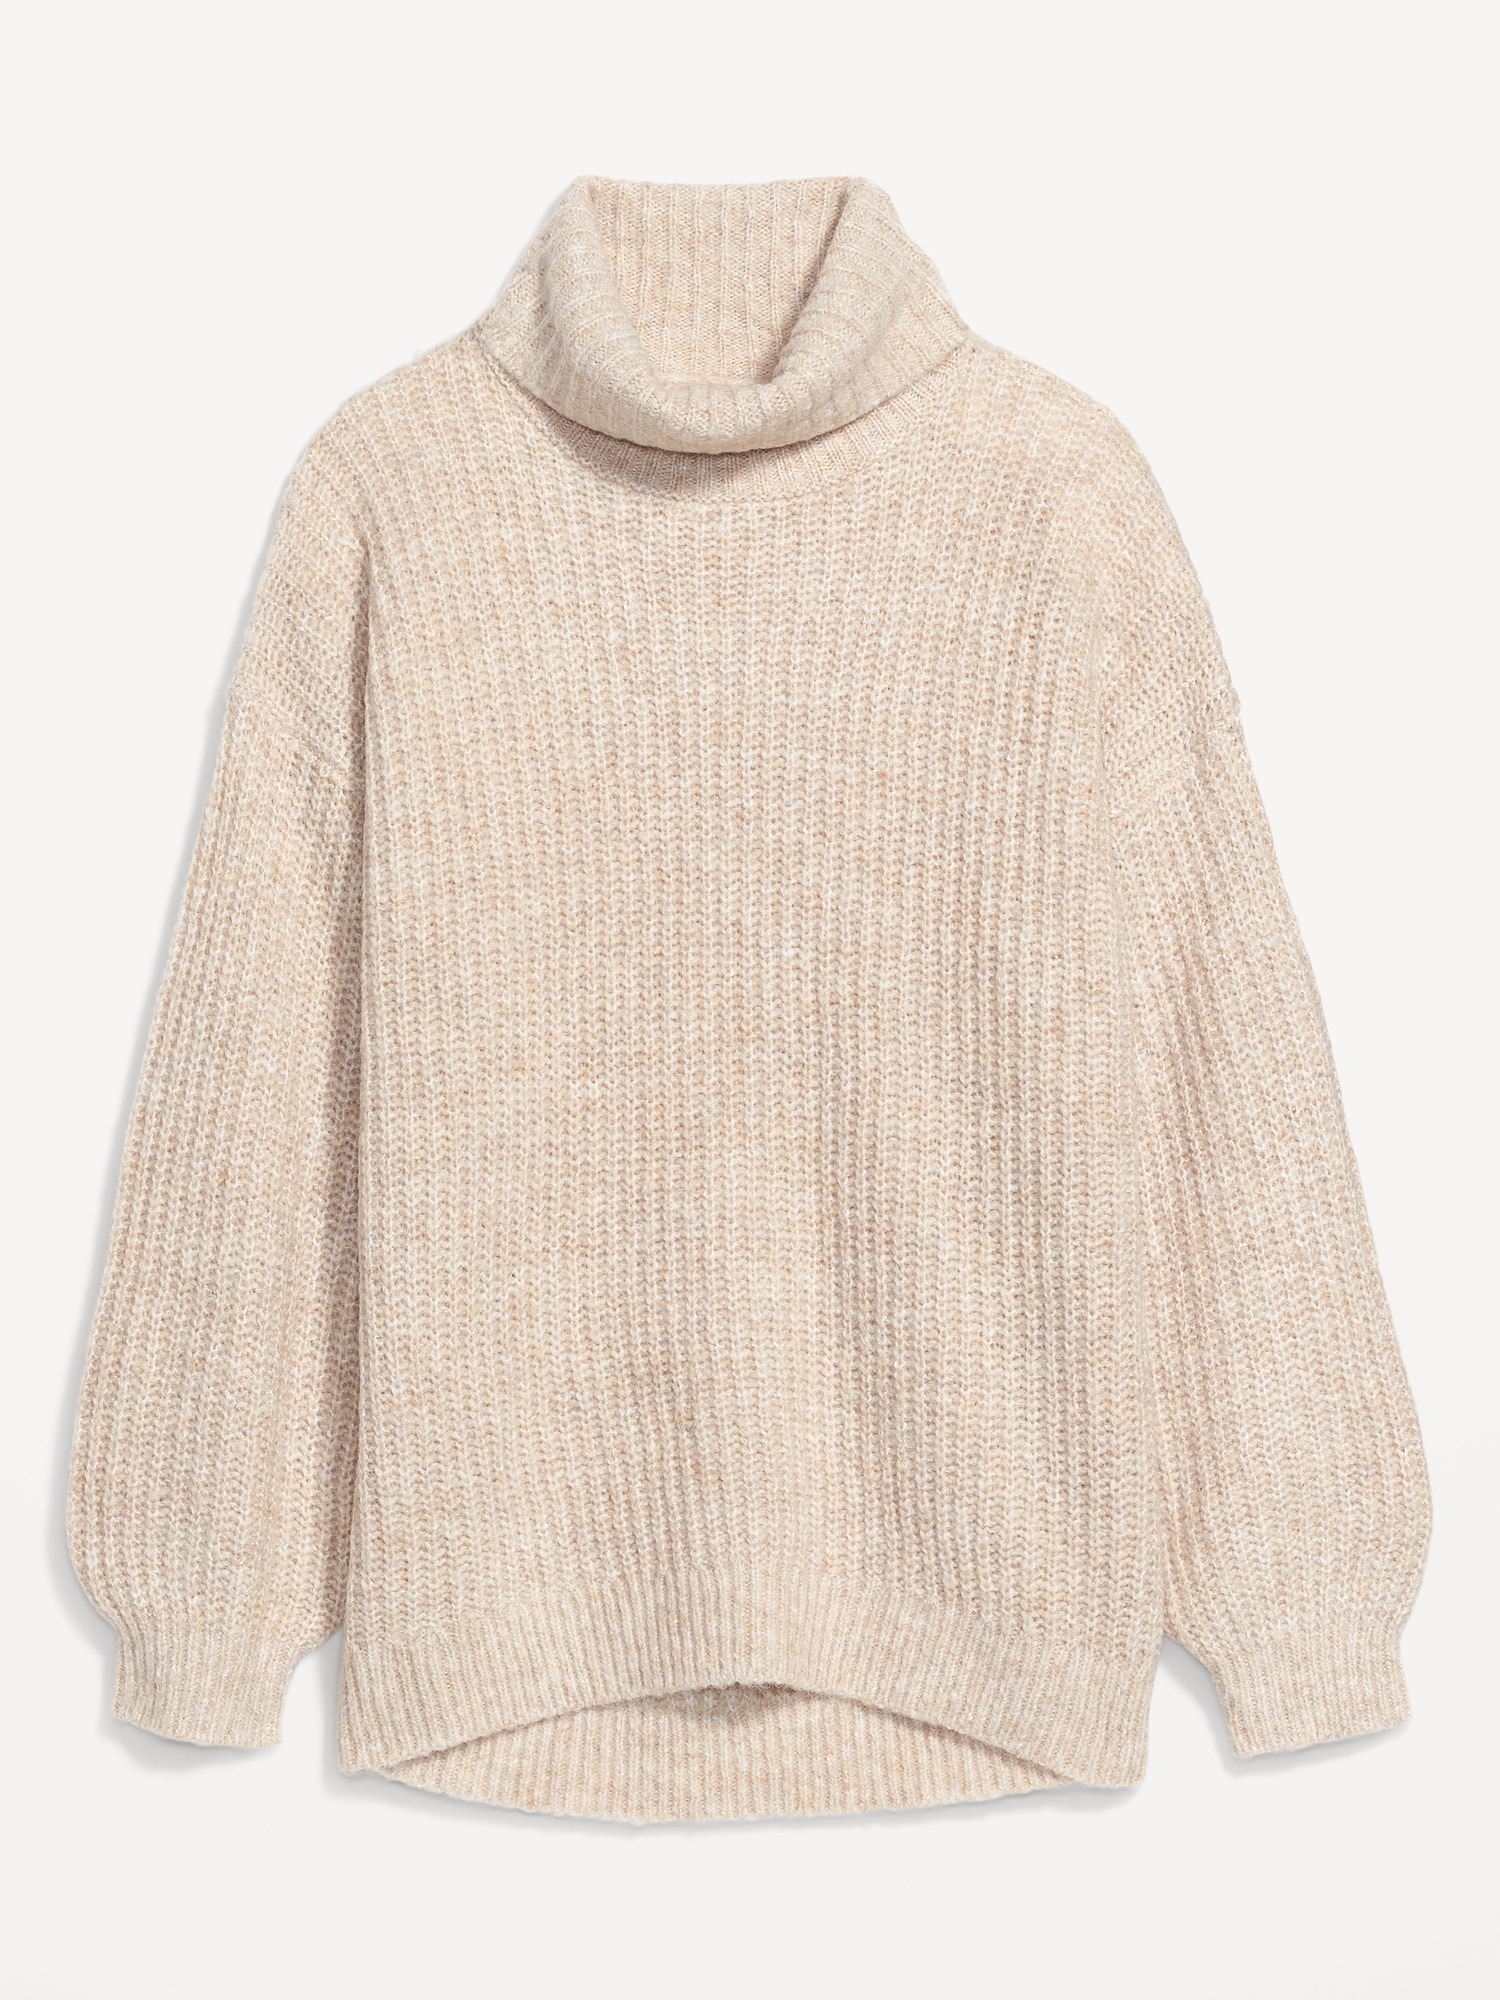 Cozy Shaker-Stitch Turtleneck Tunic Sweater for Women | Old Navy